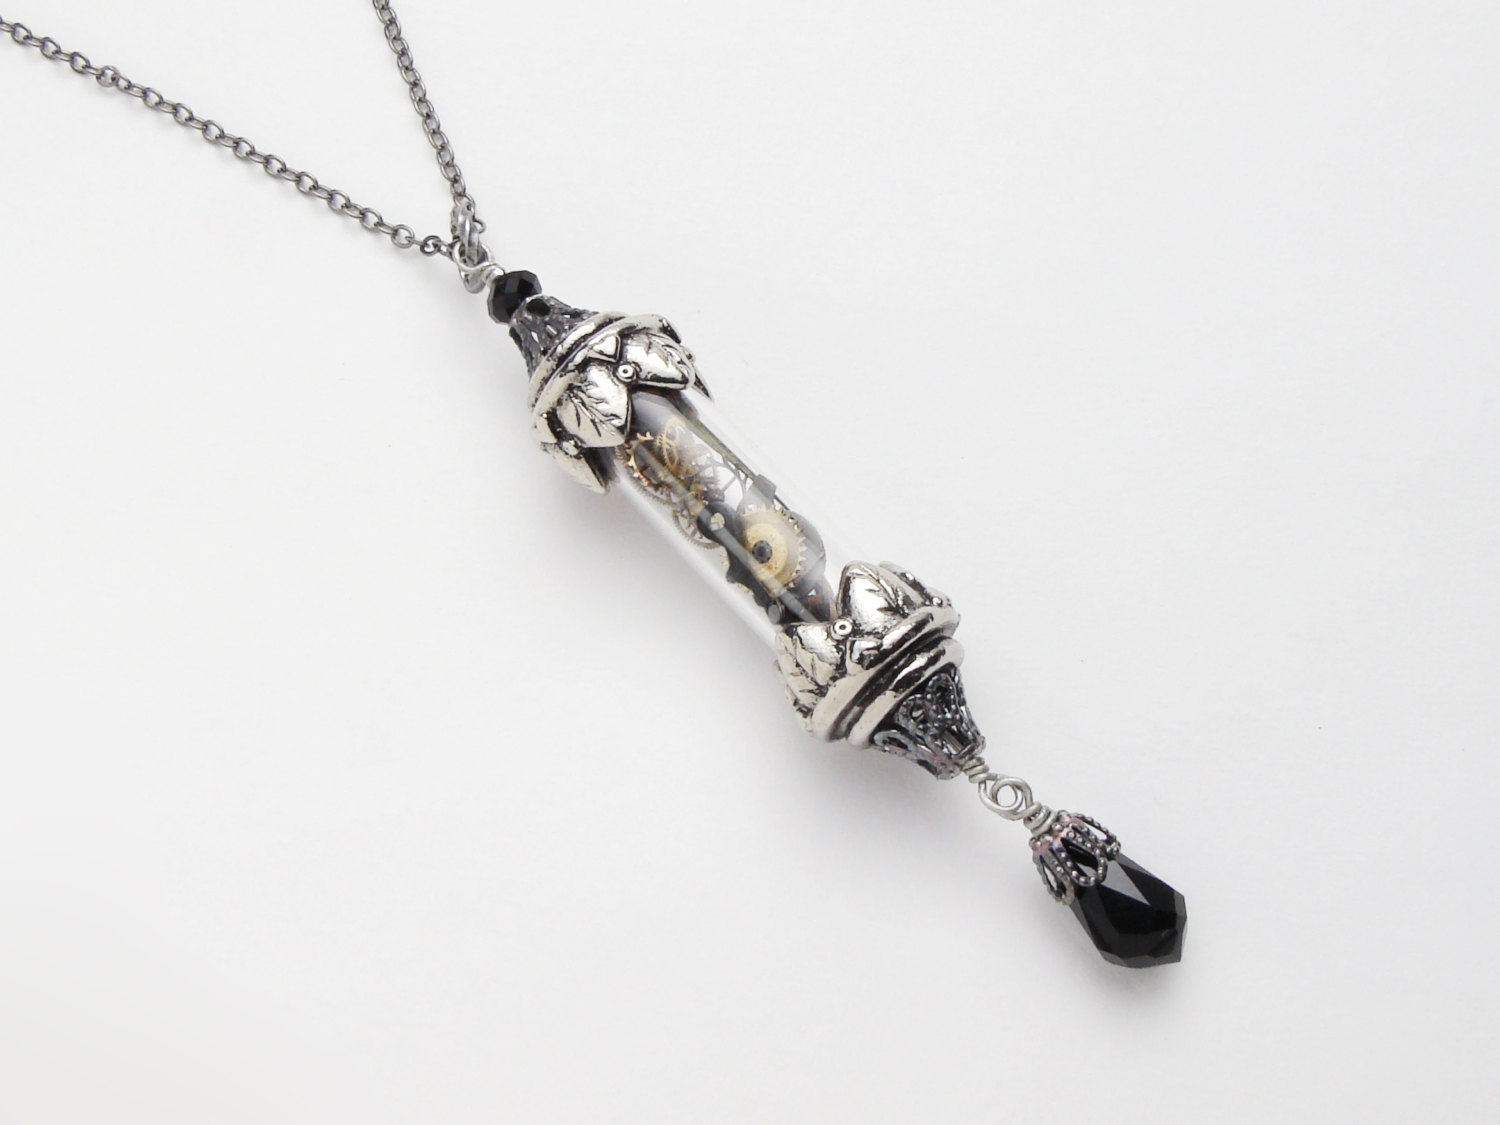 Steampunk Necklace Vintage watch parts gears time in a bottle glass vial pendant, black crystal statement necklace silver leaf jewelry R1027 steampunk buy now online